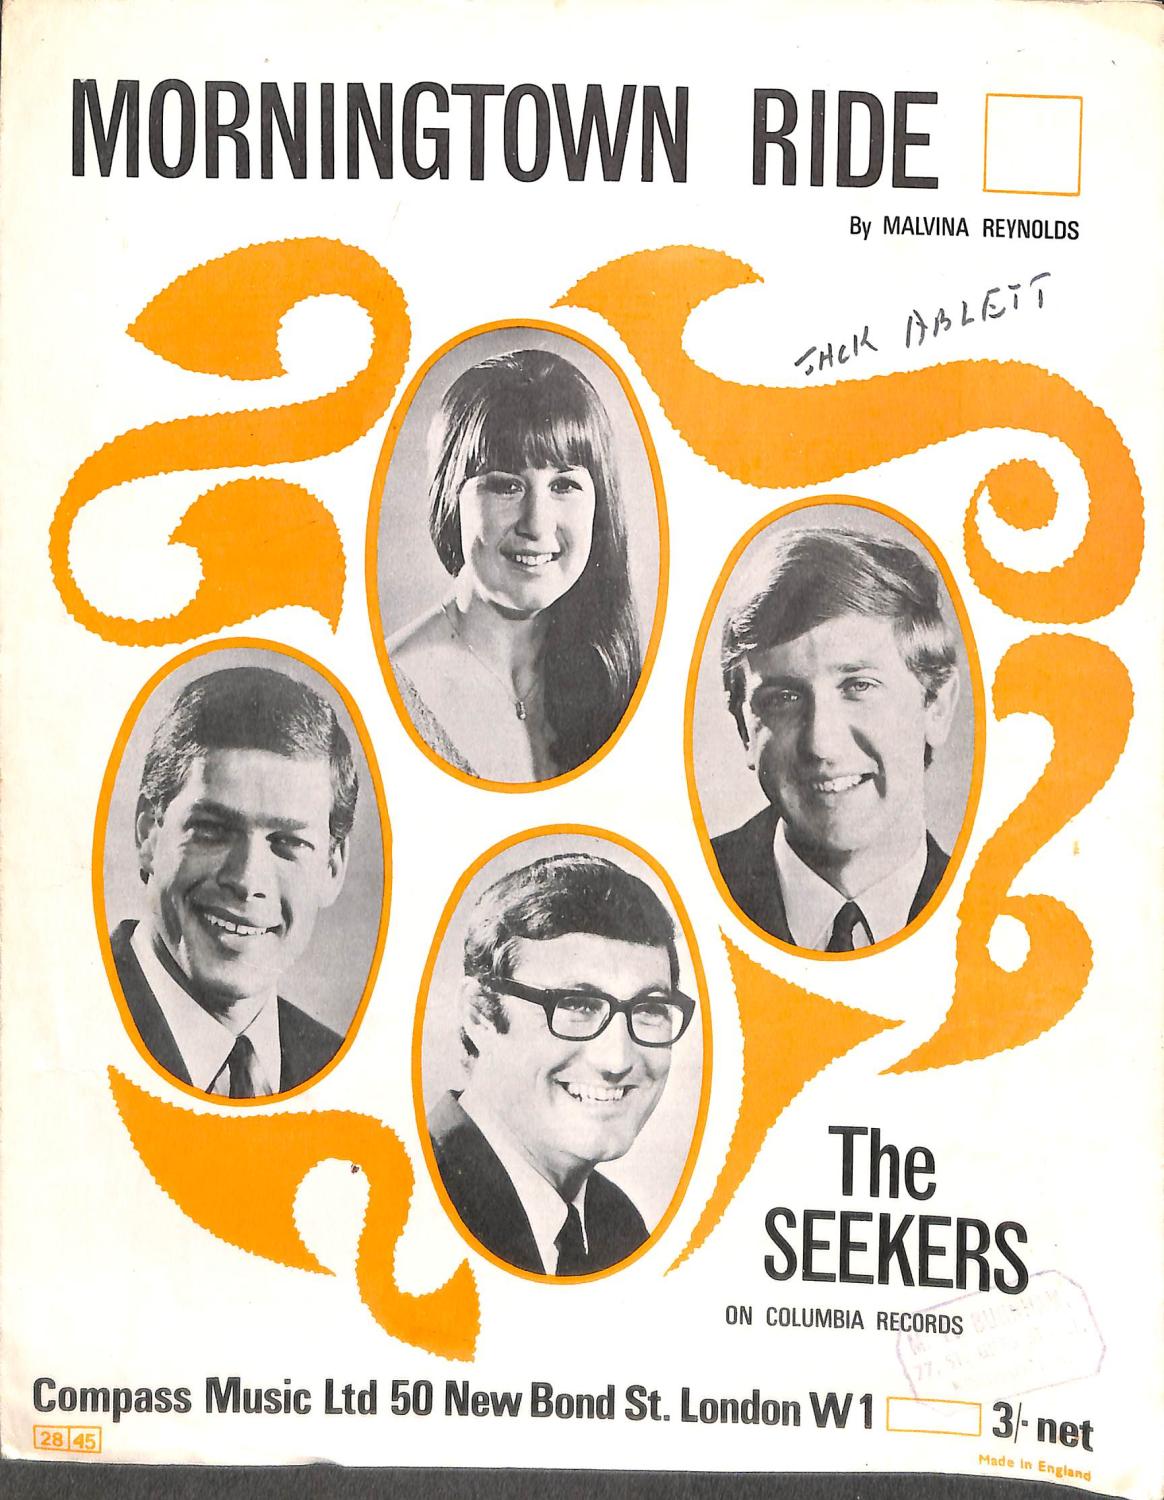 Morningtown Ride, recorded by The Seekers by Malvina Reynolds: (1966